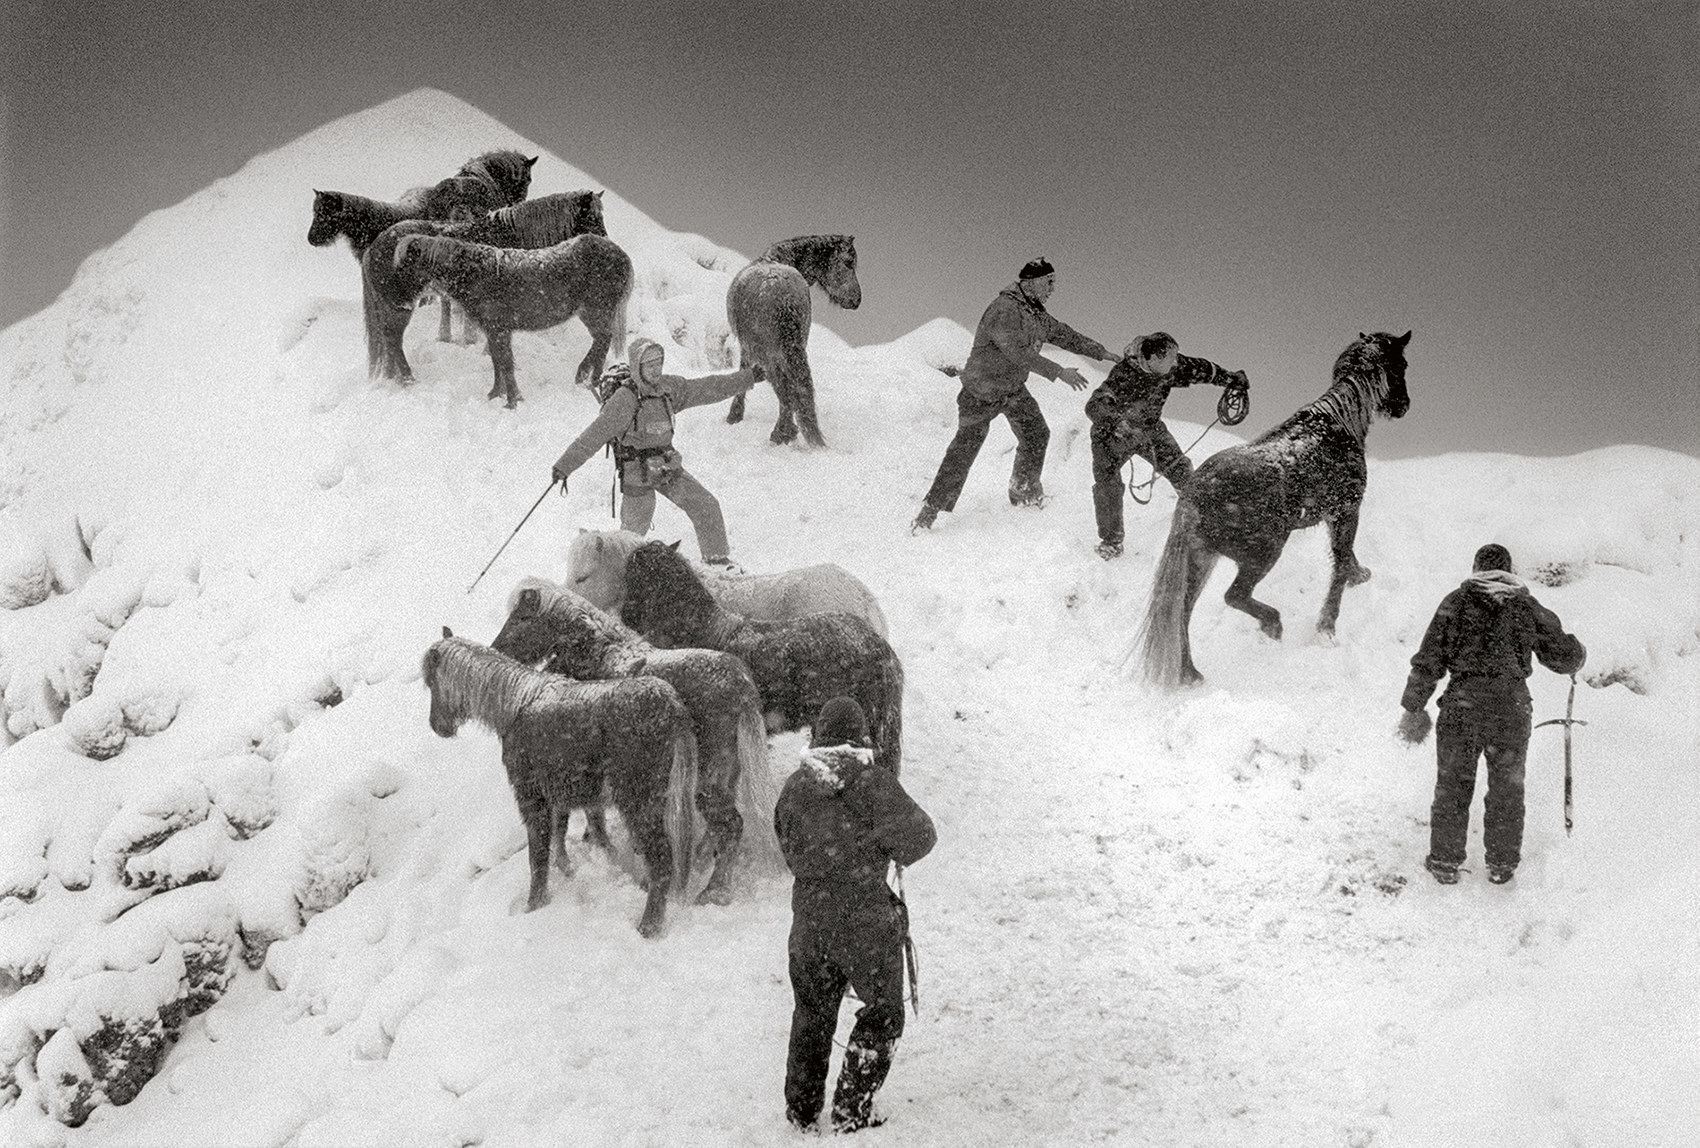 A few people herding horses in the snow